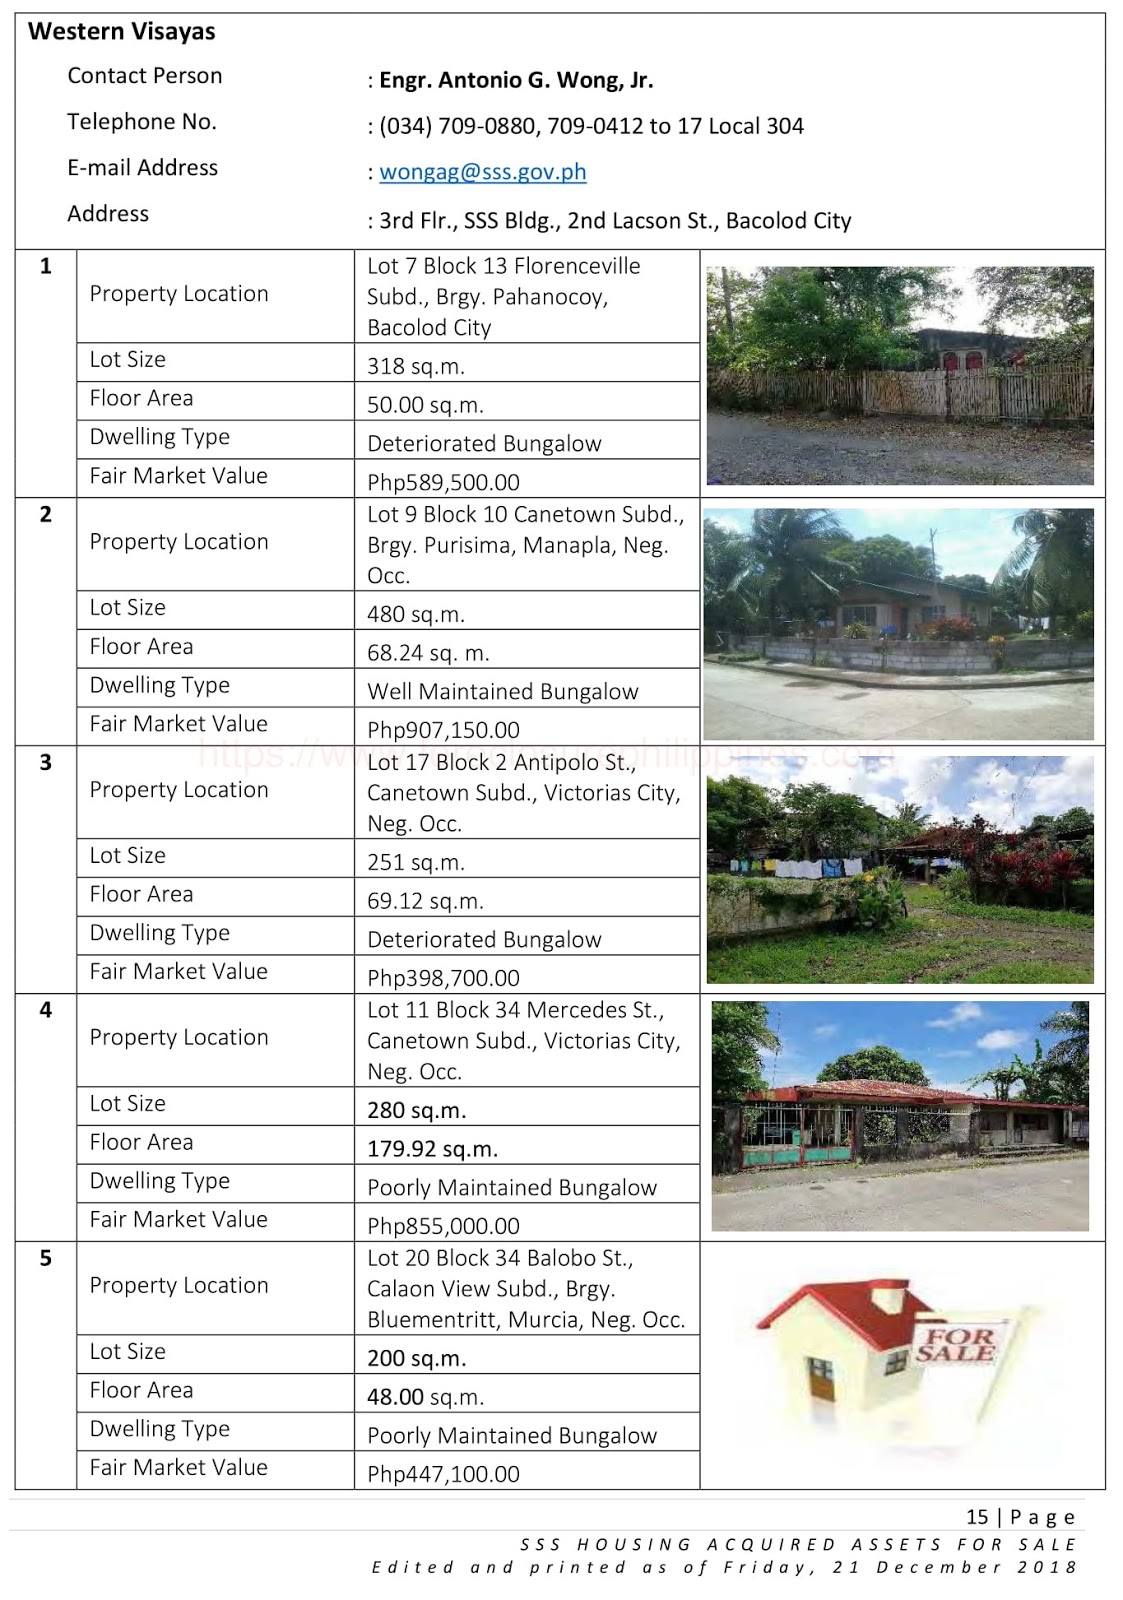 If you are looking for properties to acquire this 2019, here are some real-estate properties from Social Security System (SSS). The following are a total of 176 foreclosed properties for sale nationwide! These properties are available for negotiated sale so check out below for the number of properties available per region!  Metro Manila (NCR): 12 Northern Luzon: 7 Central Luzon: 25 Southern Luzon: 9 Bicol Region: 2 Central Visayas: 1 Western Visayas: 13 Southern Mindanao: 104 Western Mindanao: 3